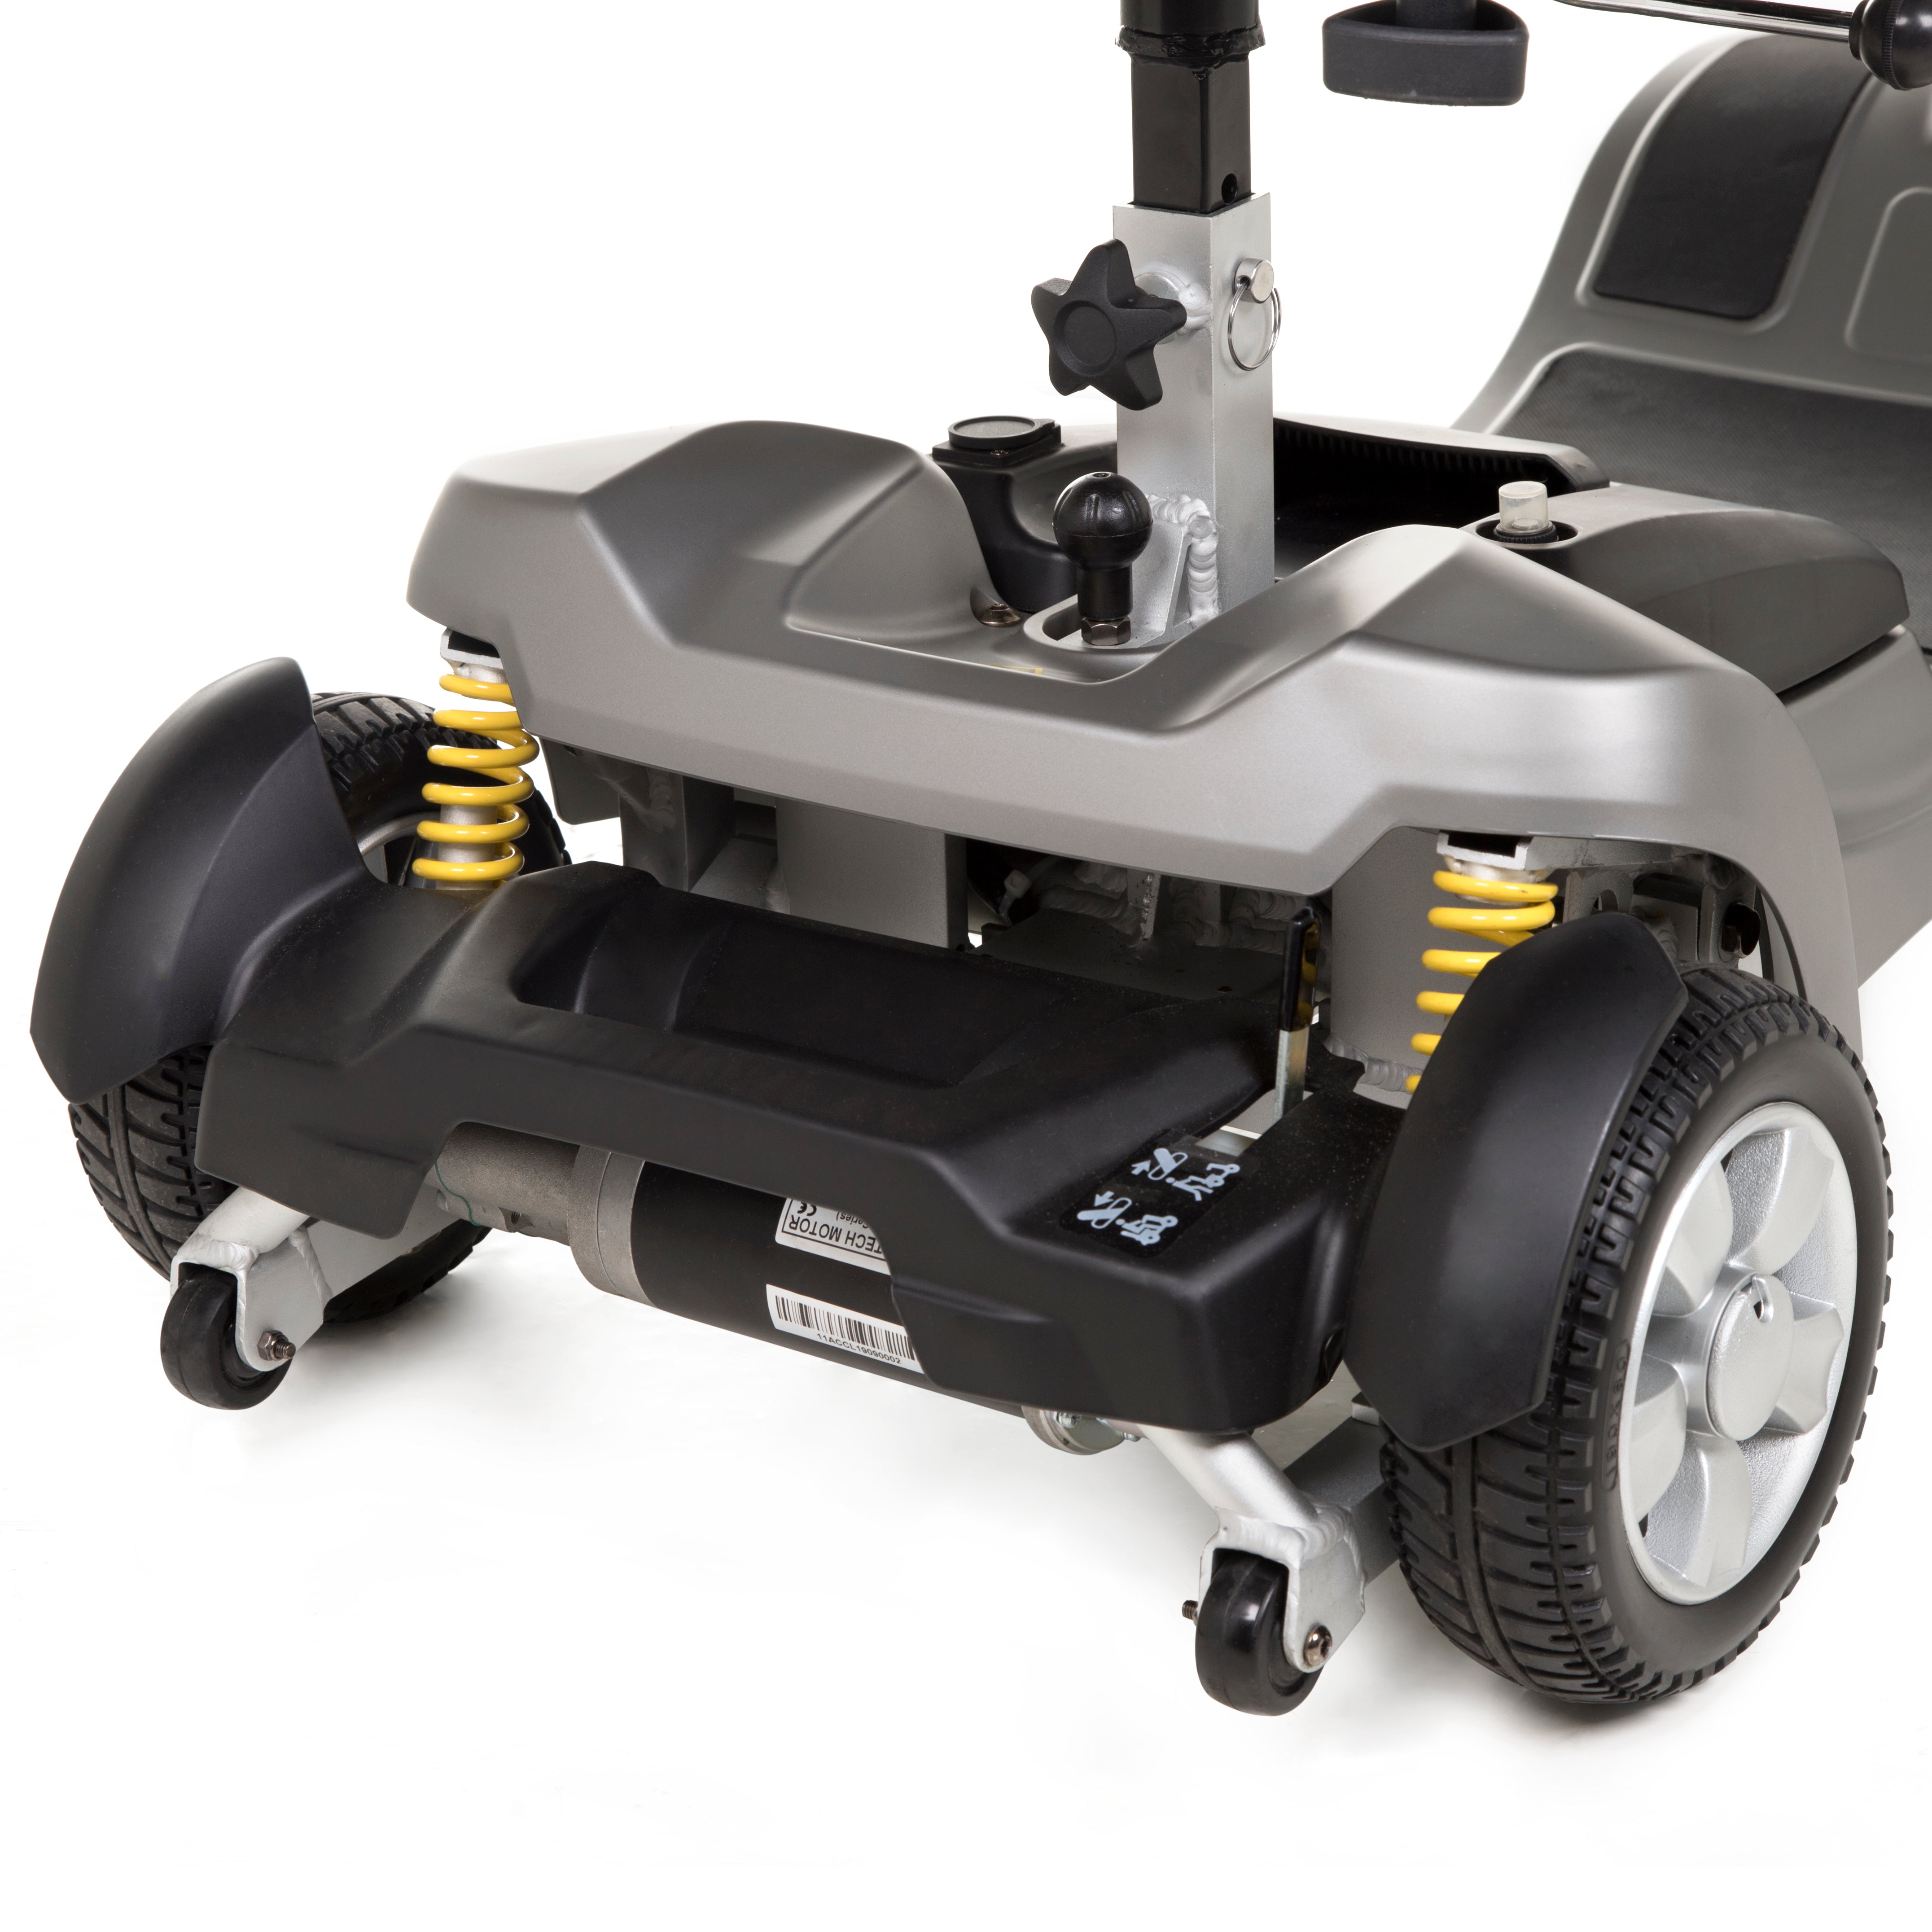 Motion Healthcare Alumina Pro – Lightweight, Long-Range Mobility Scooter